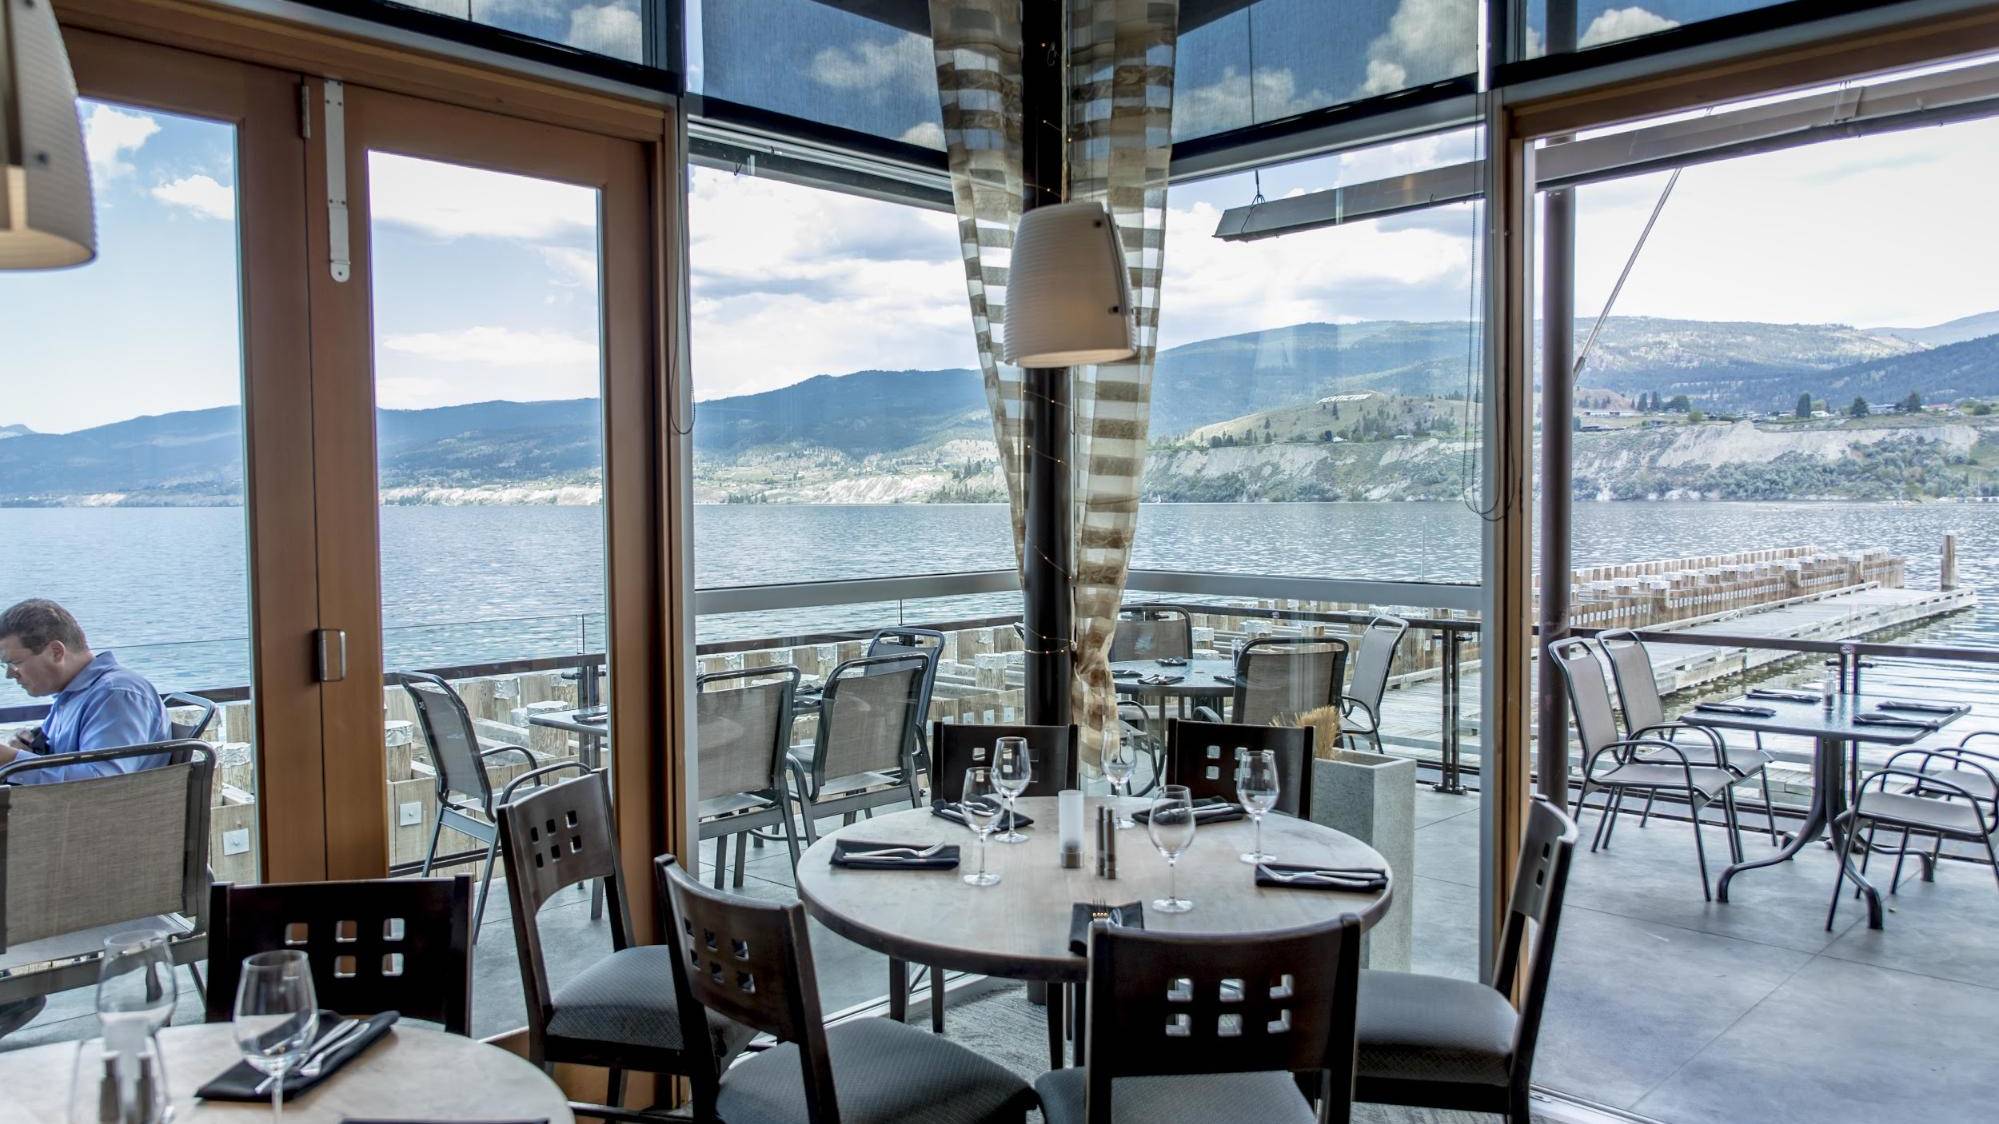 Photo by: Penticton Lakeside Resort; Amazing Patio Views at The Hooded Merganser Restaurant.